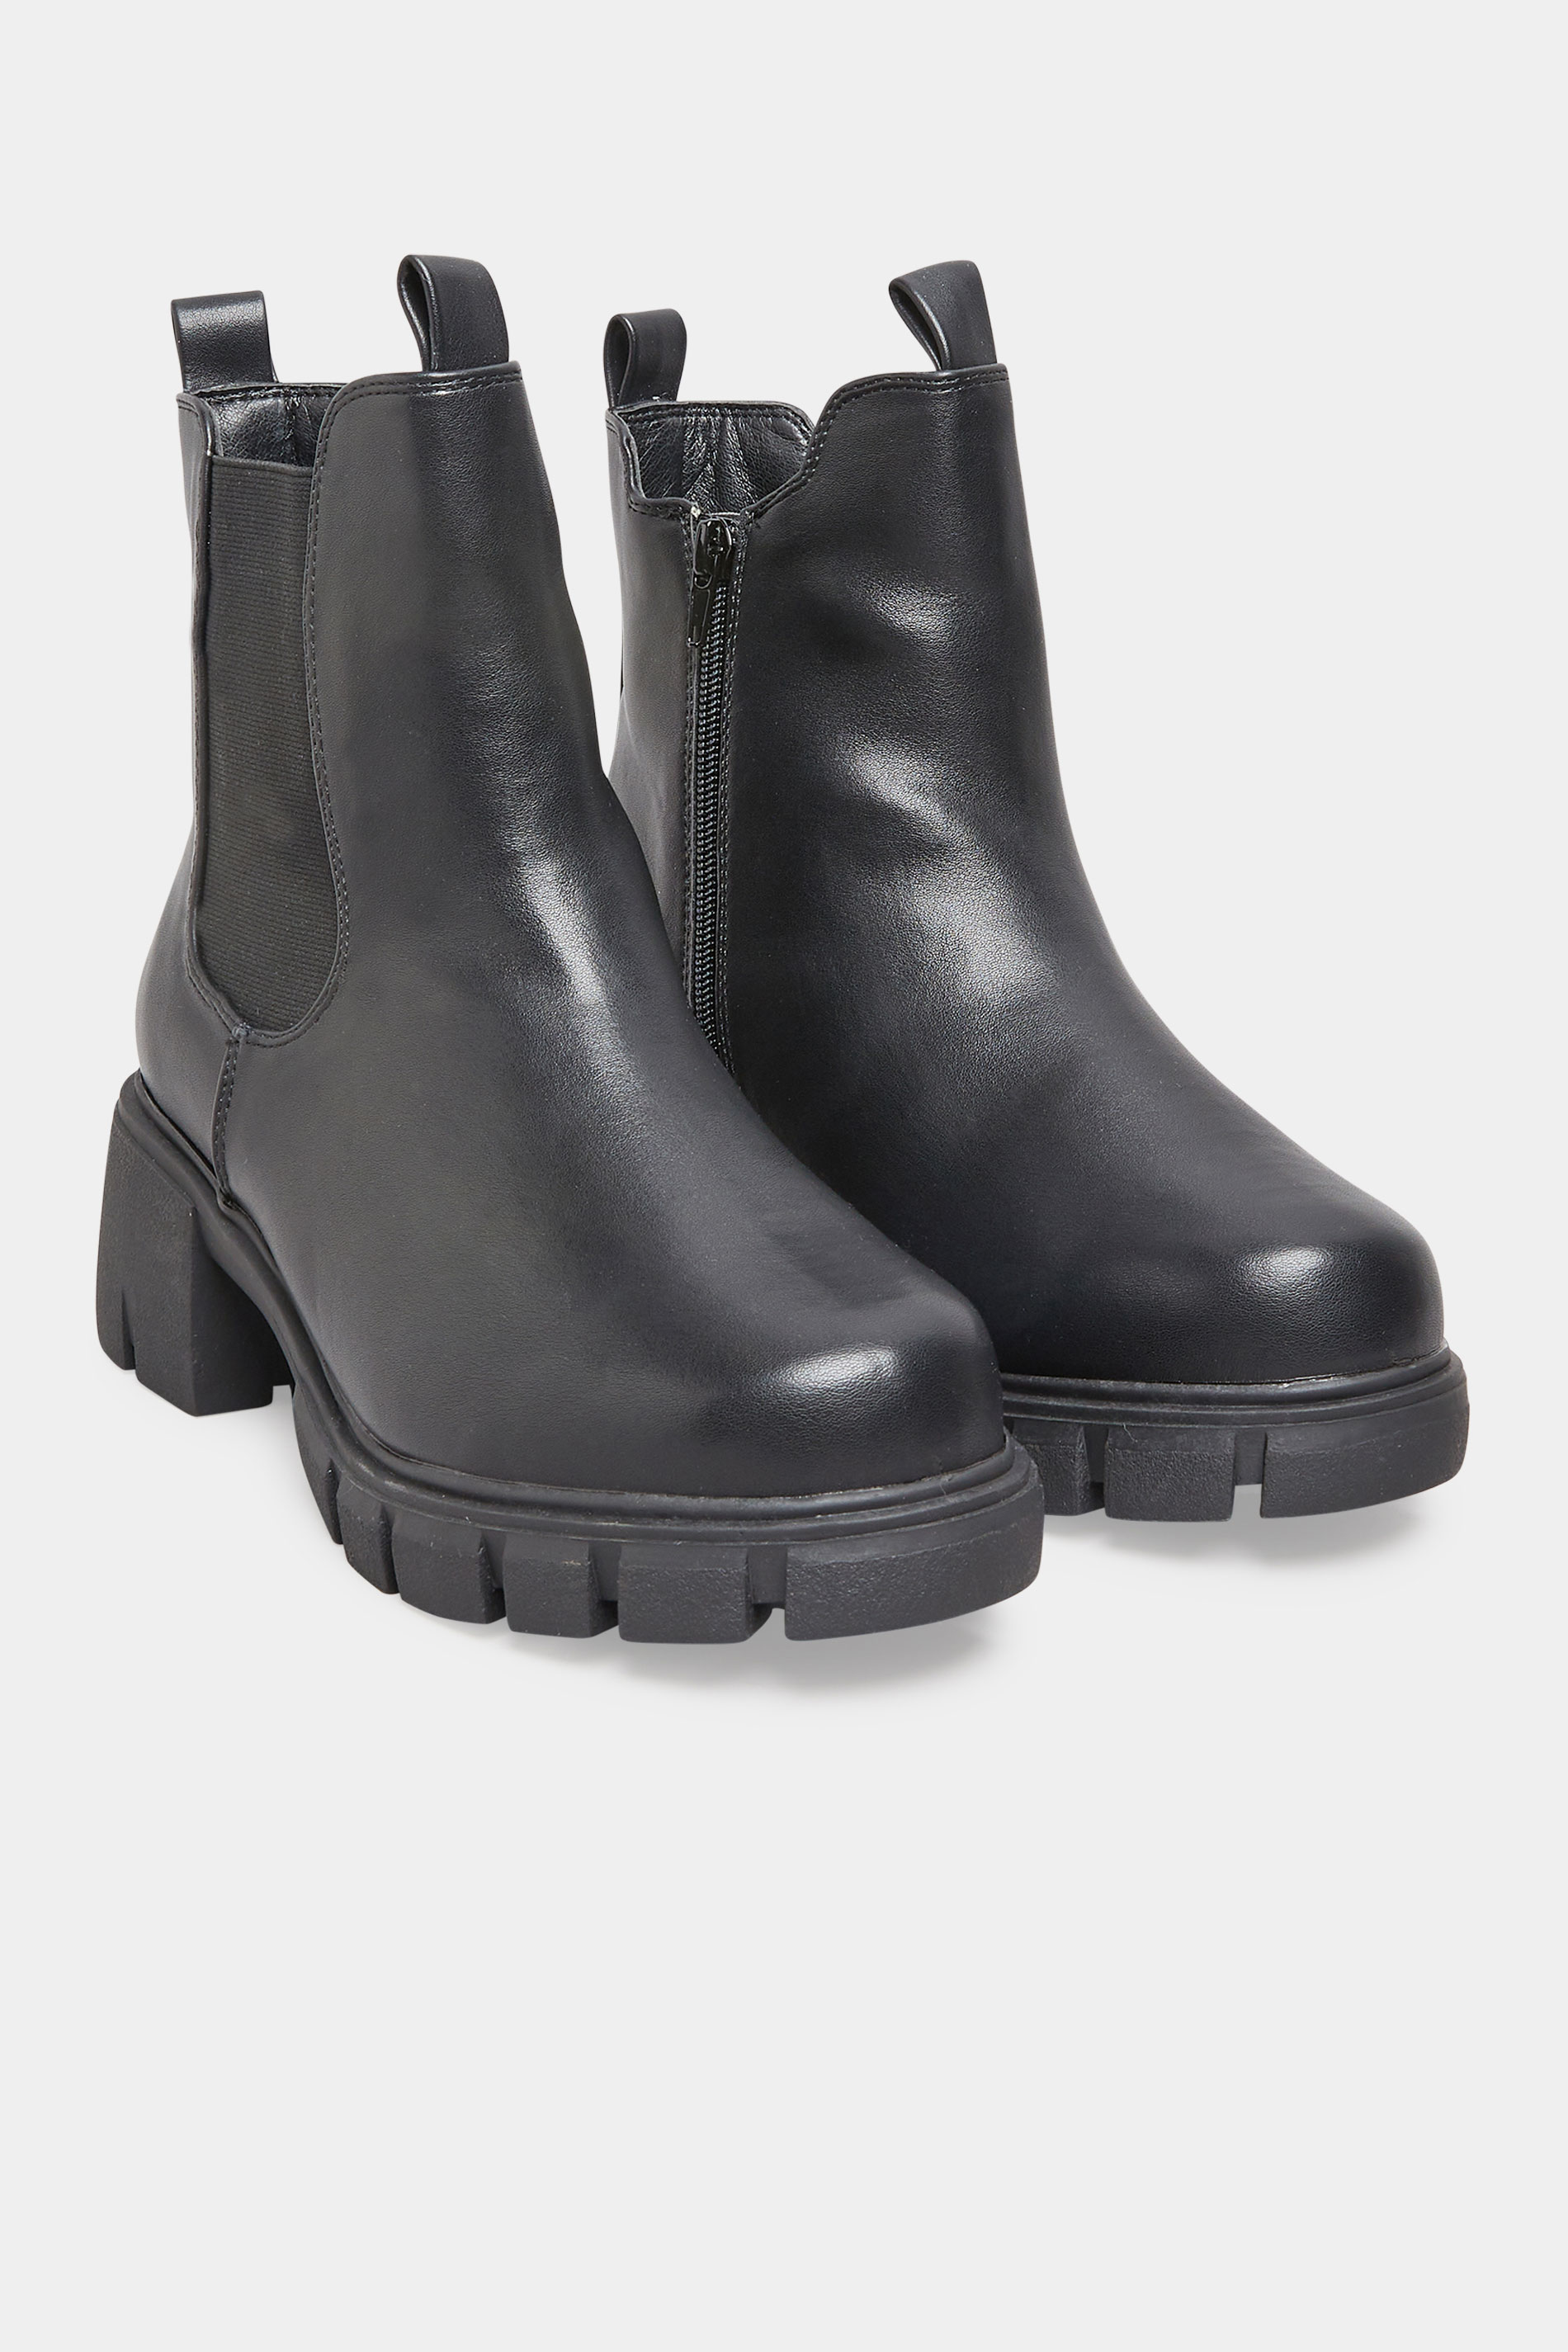 LIMITED COLLECTION Black Chunky Chelsea Boots In Extra Wide EEE Fit_Ar.jpg